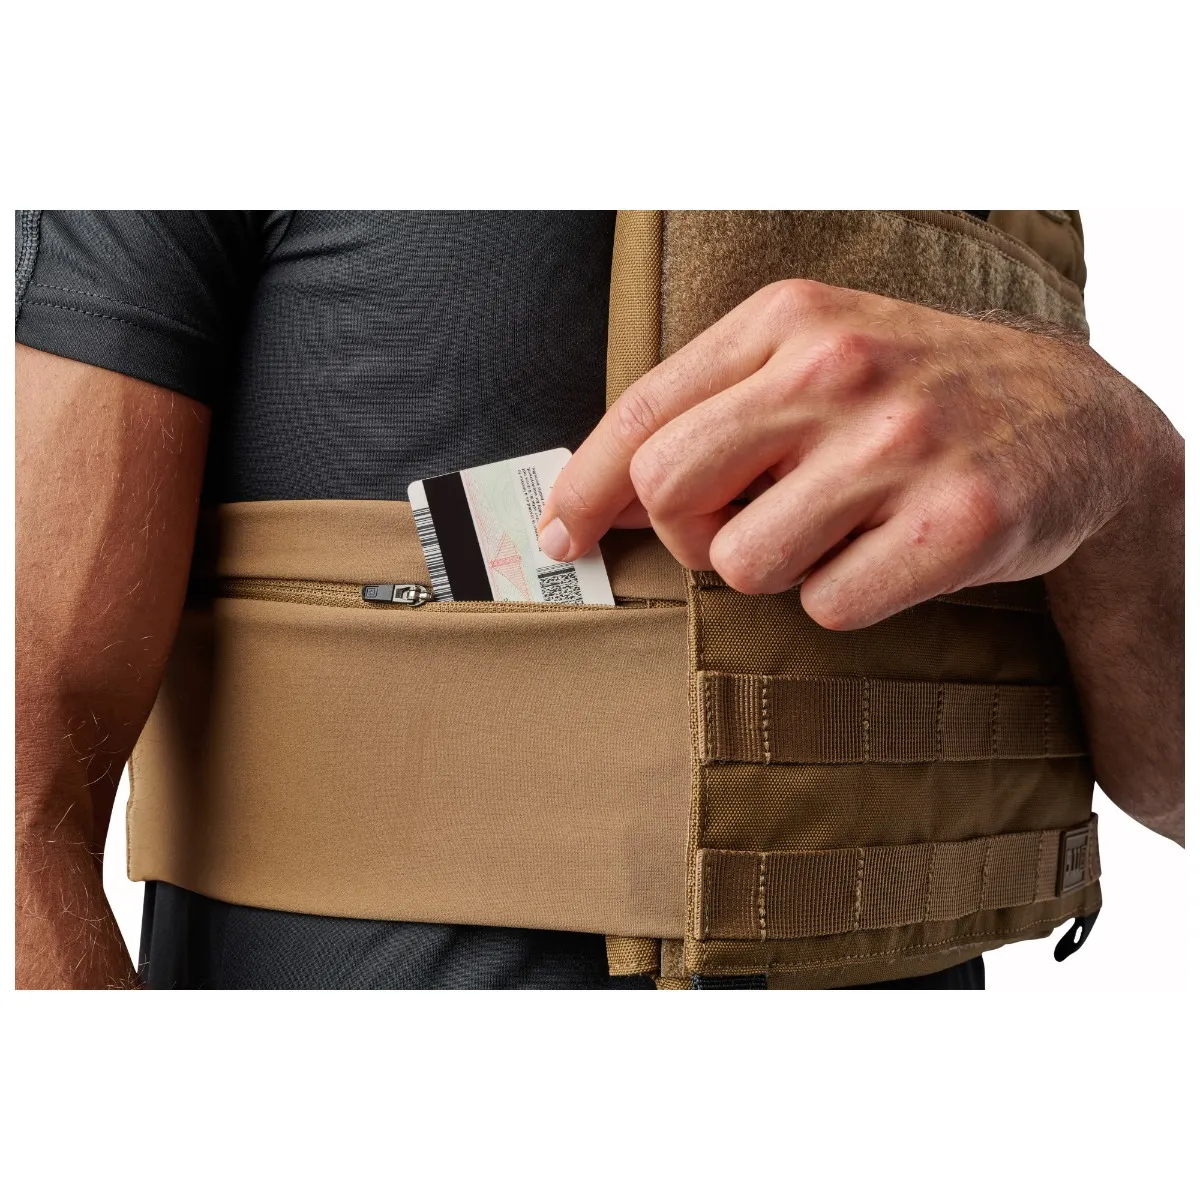 TacTec Trainer Weight Vest Sage Green, One Size